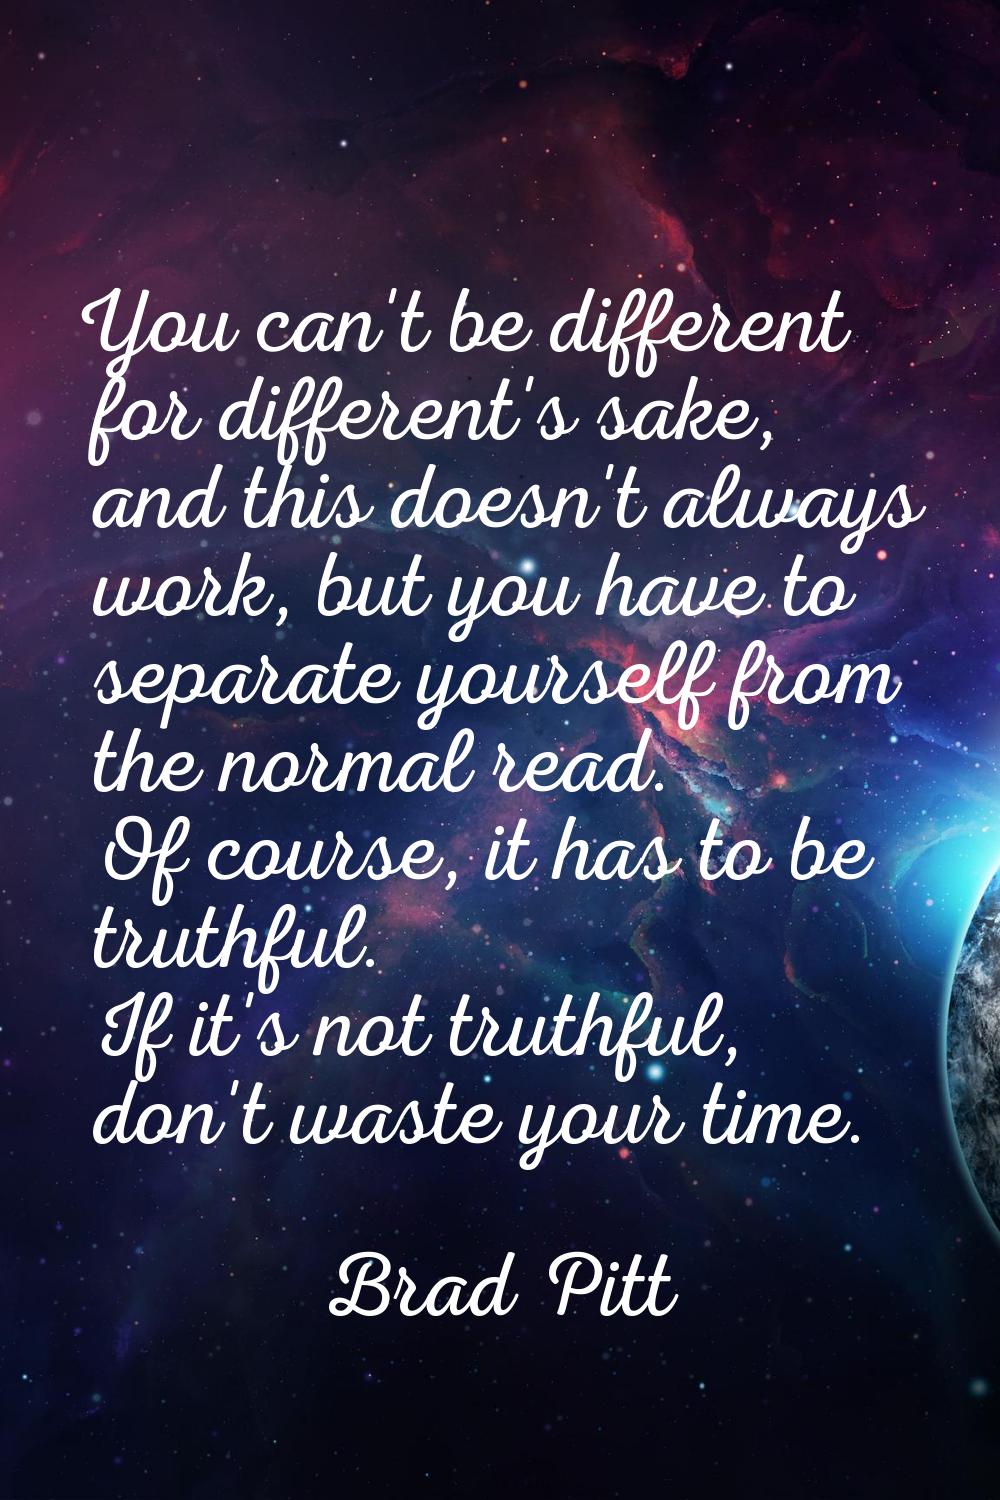 You can't be different for different's sake, and this doesn't always work, but you have to separate